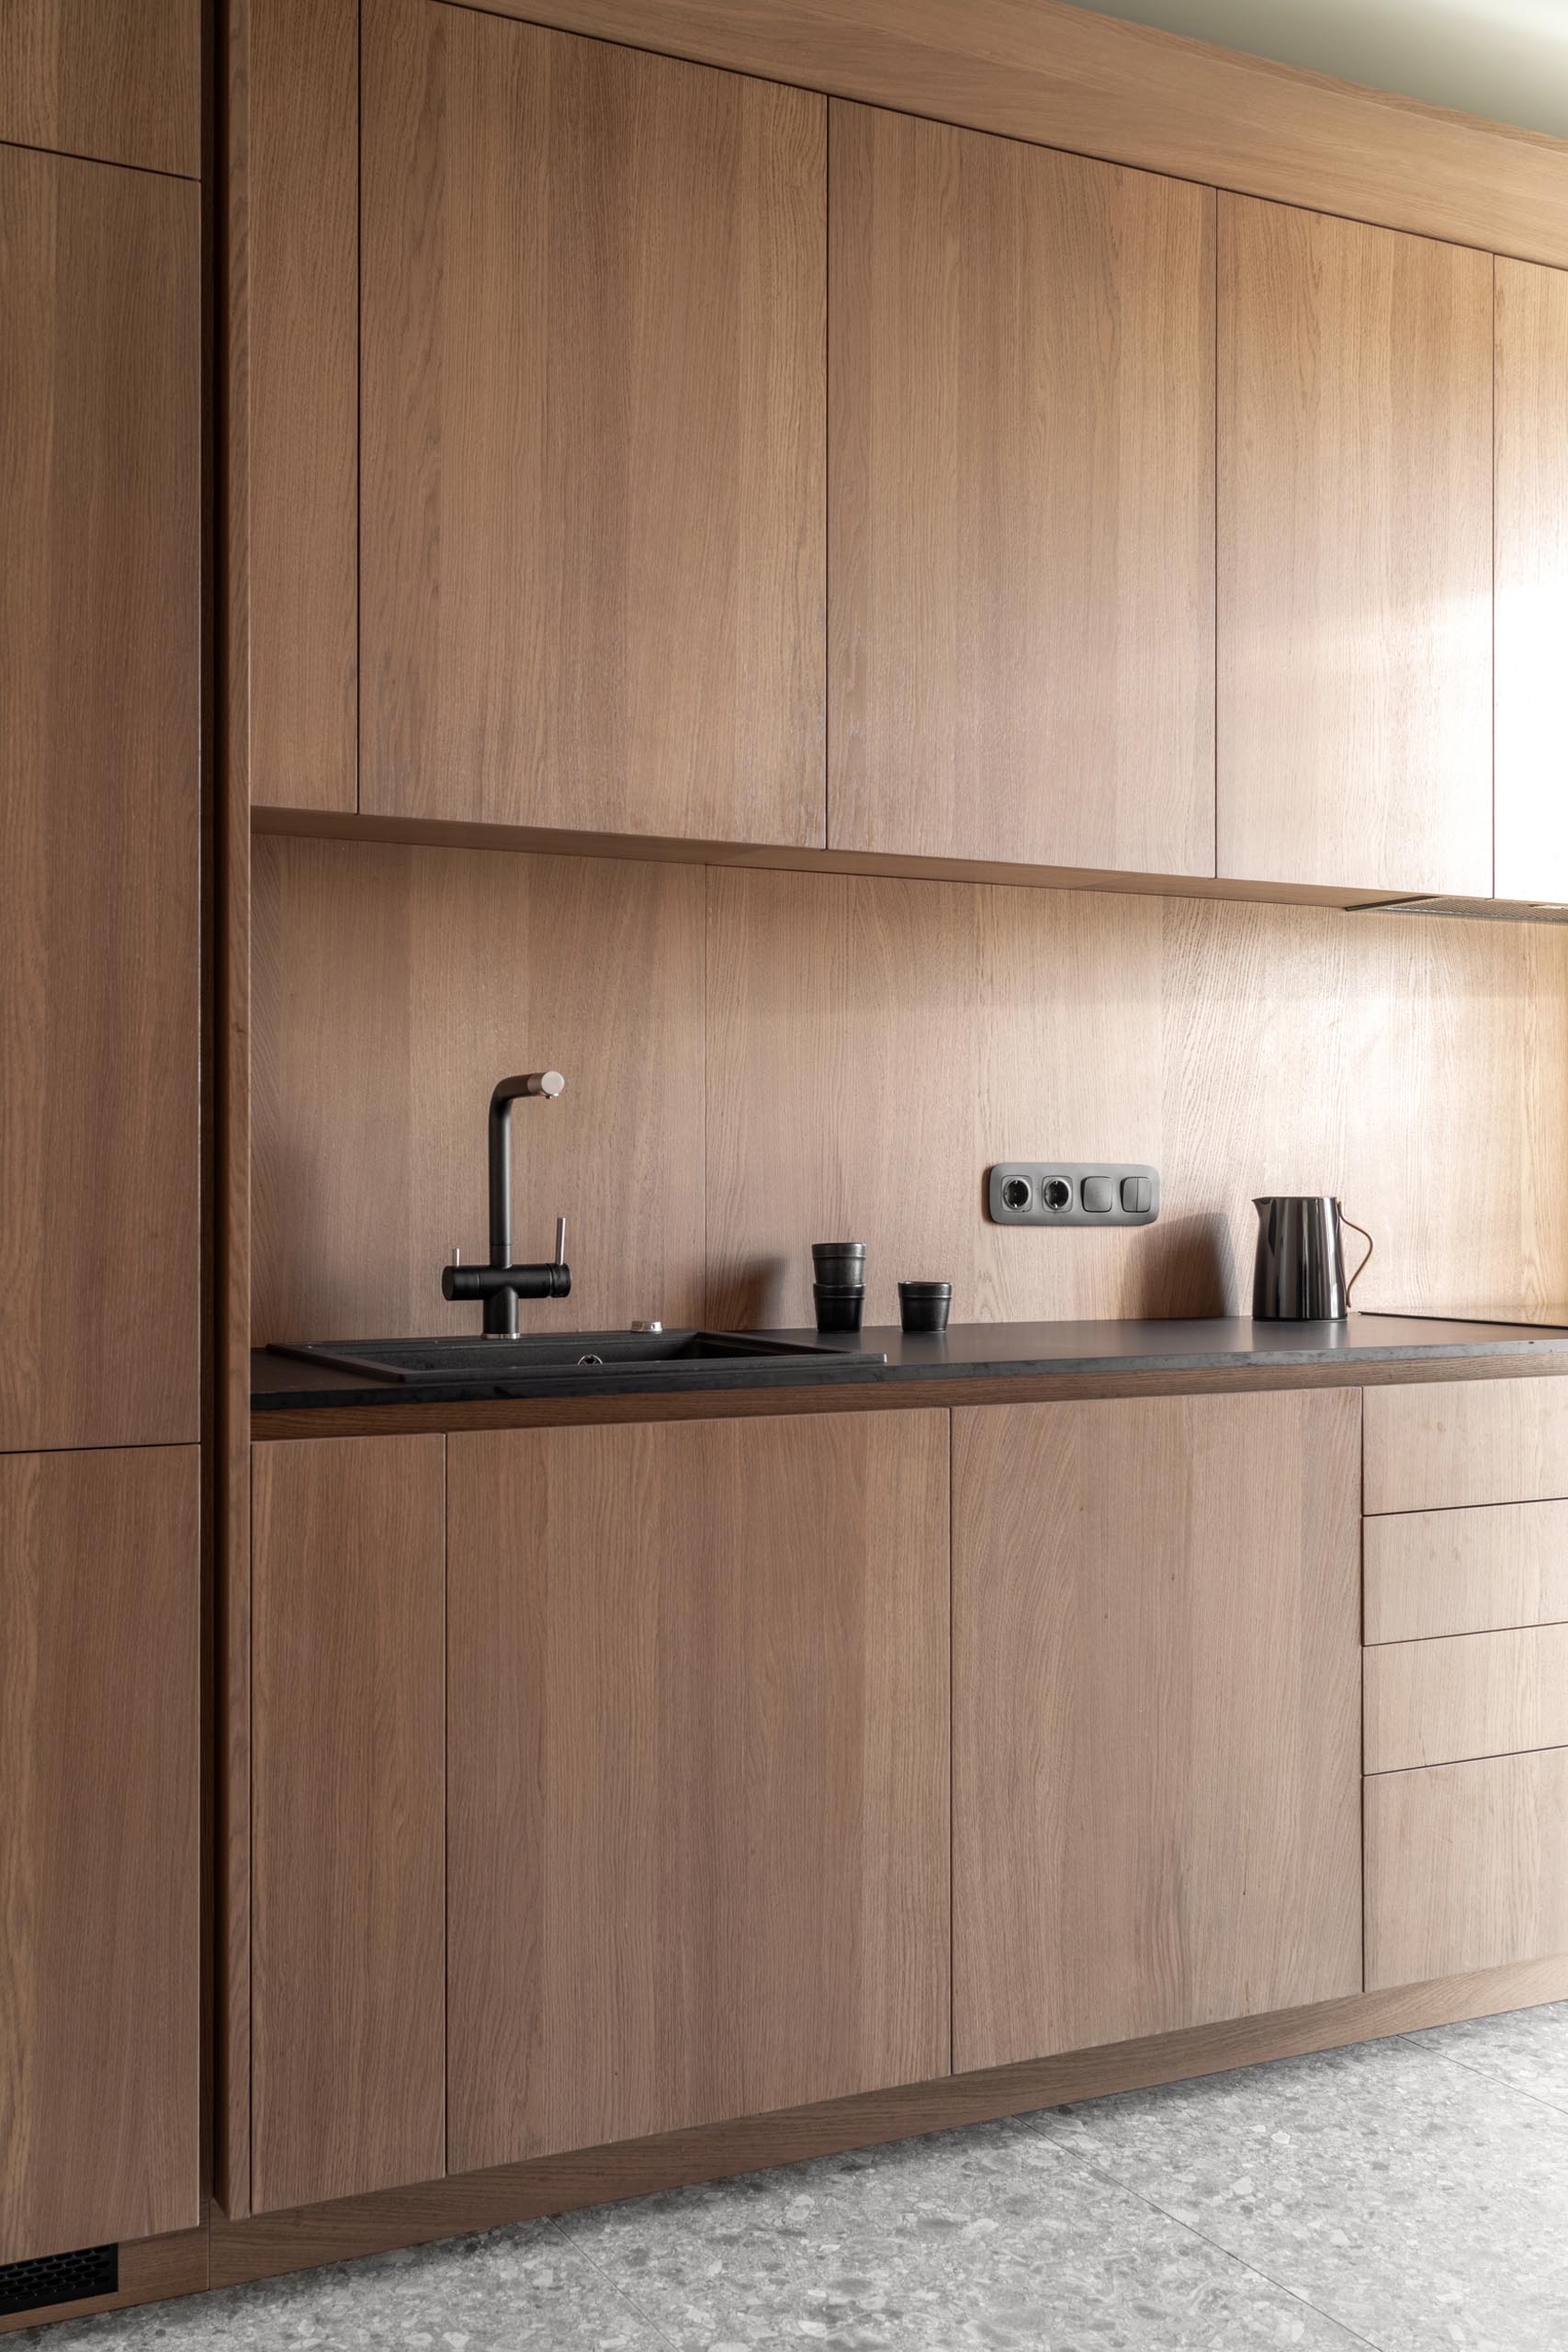 wood cabinets without hardware are a consistent feature throughout